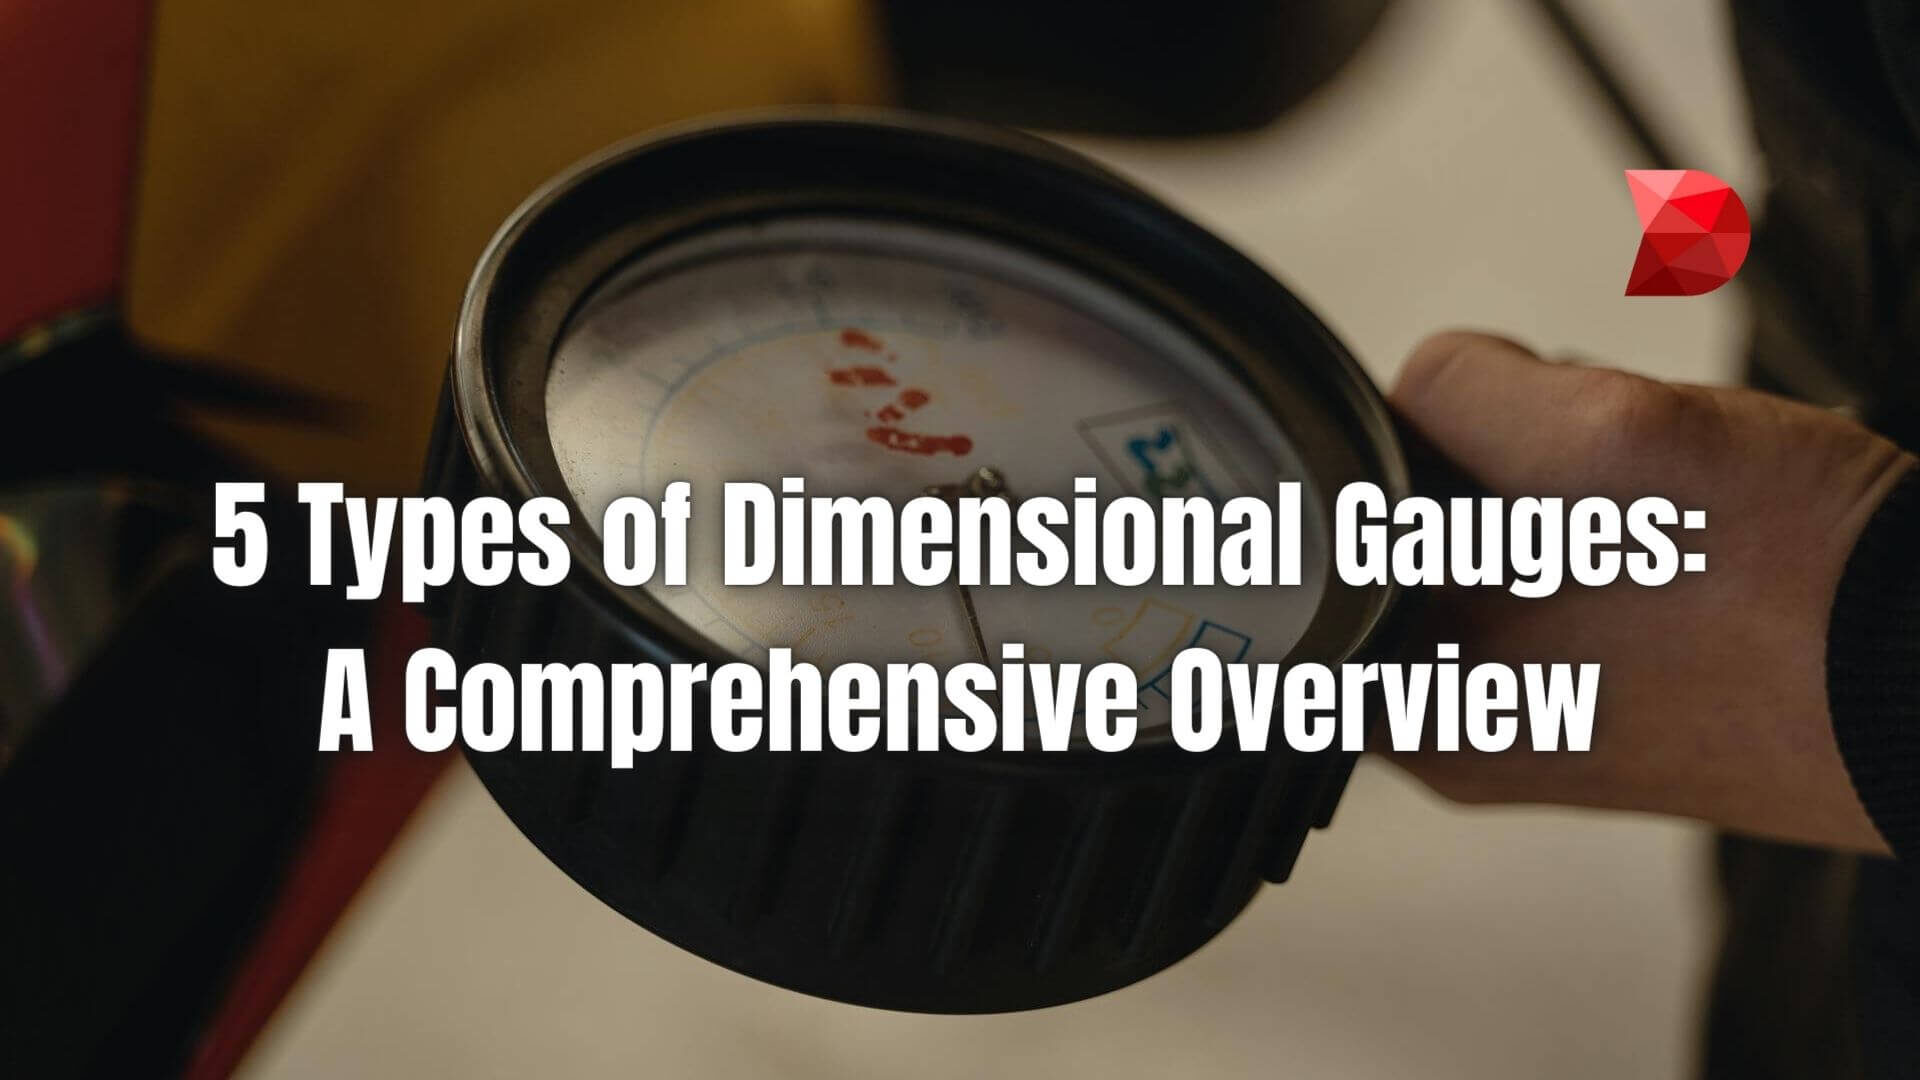 Unlock precision with our guide to the 5 types of dimensional gauges. Learn about their uses and applications for optimal measurements.